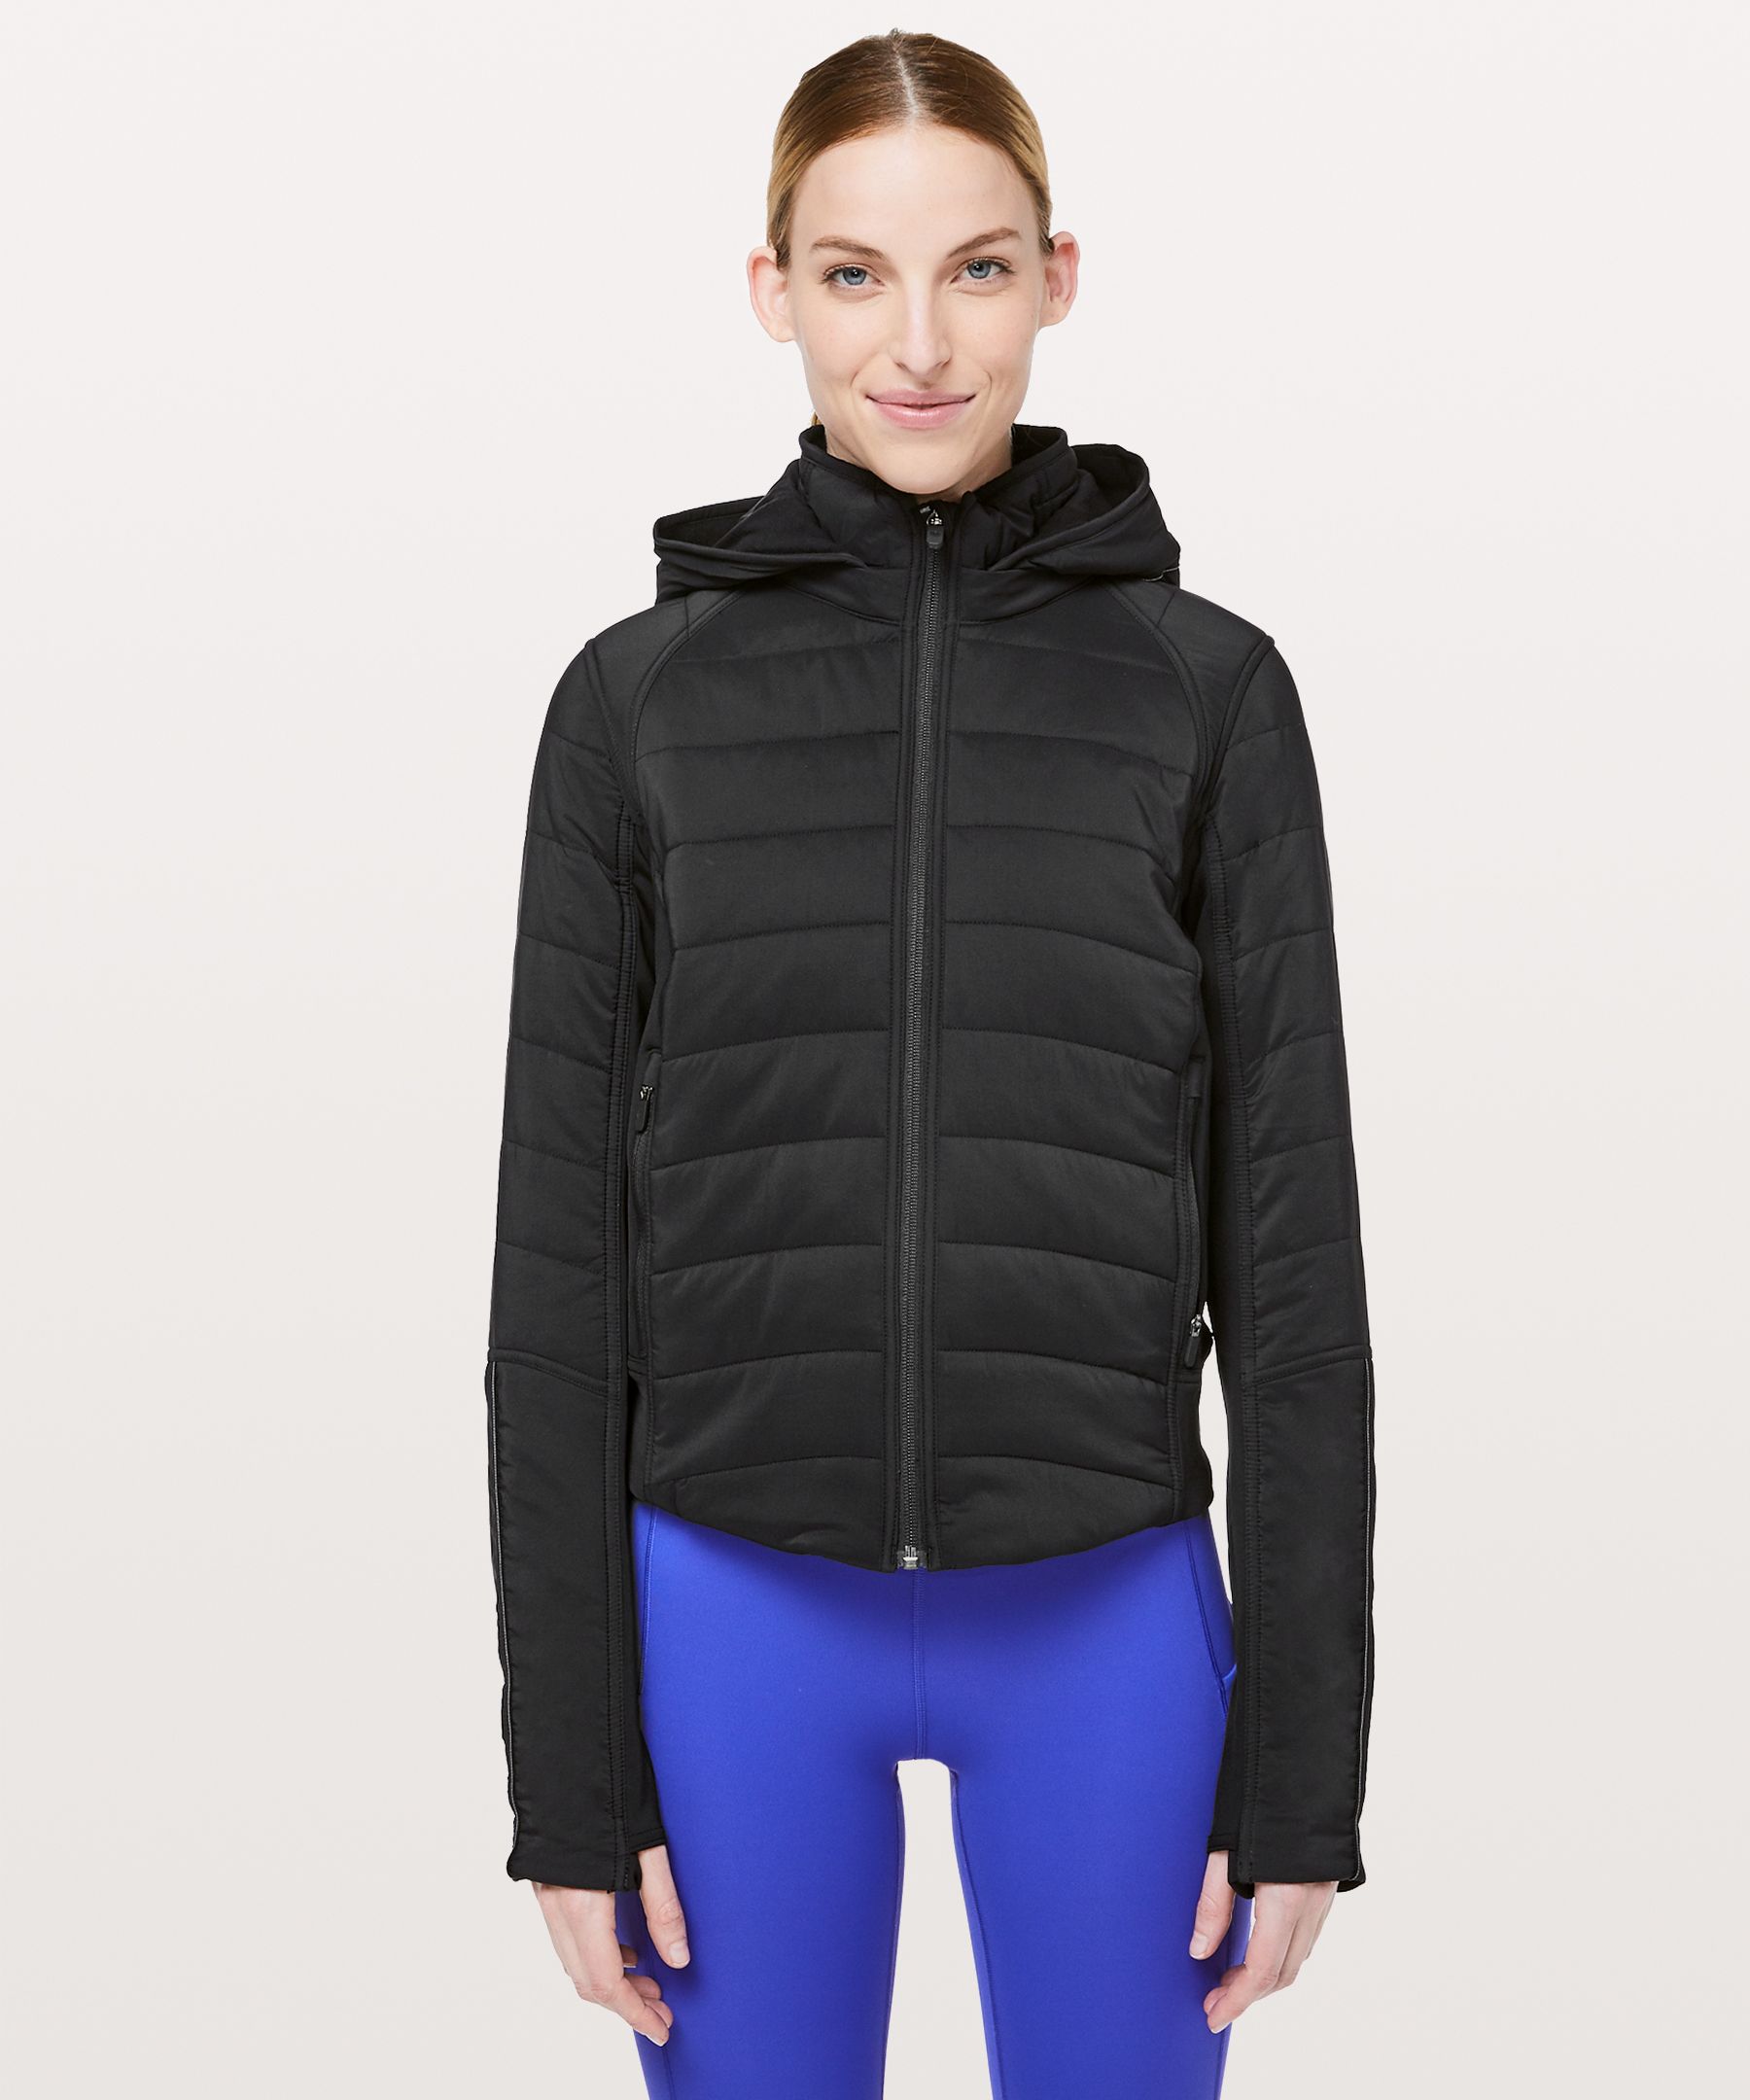 Push Your Pace Jacket, Coats and Jackets